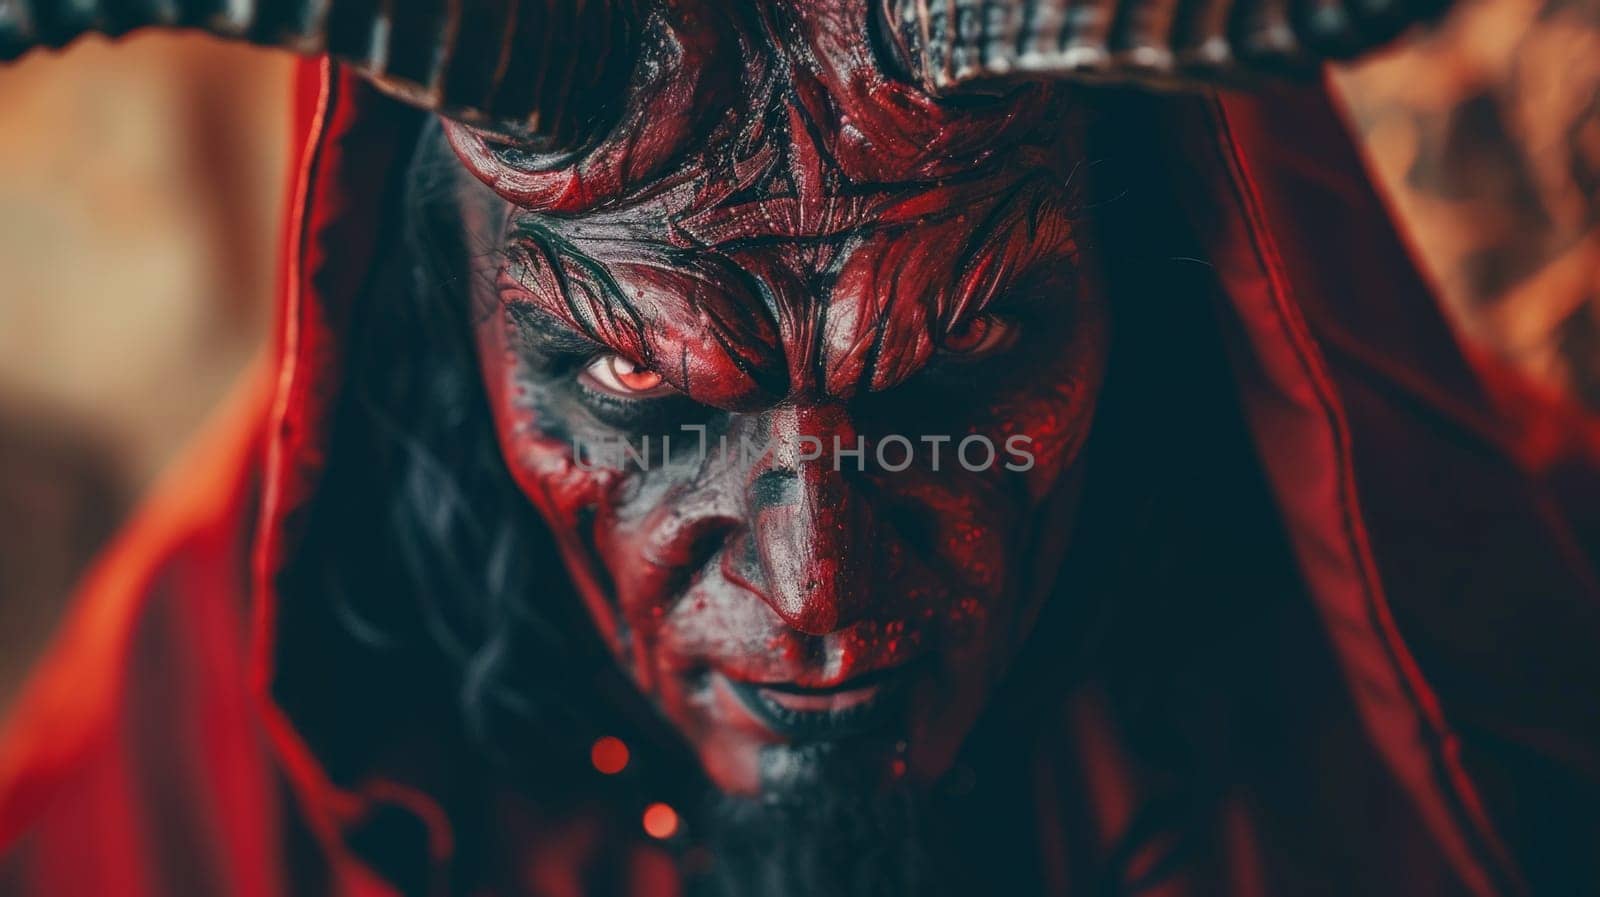 A close up of a demon with horns and red face